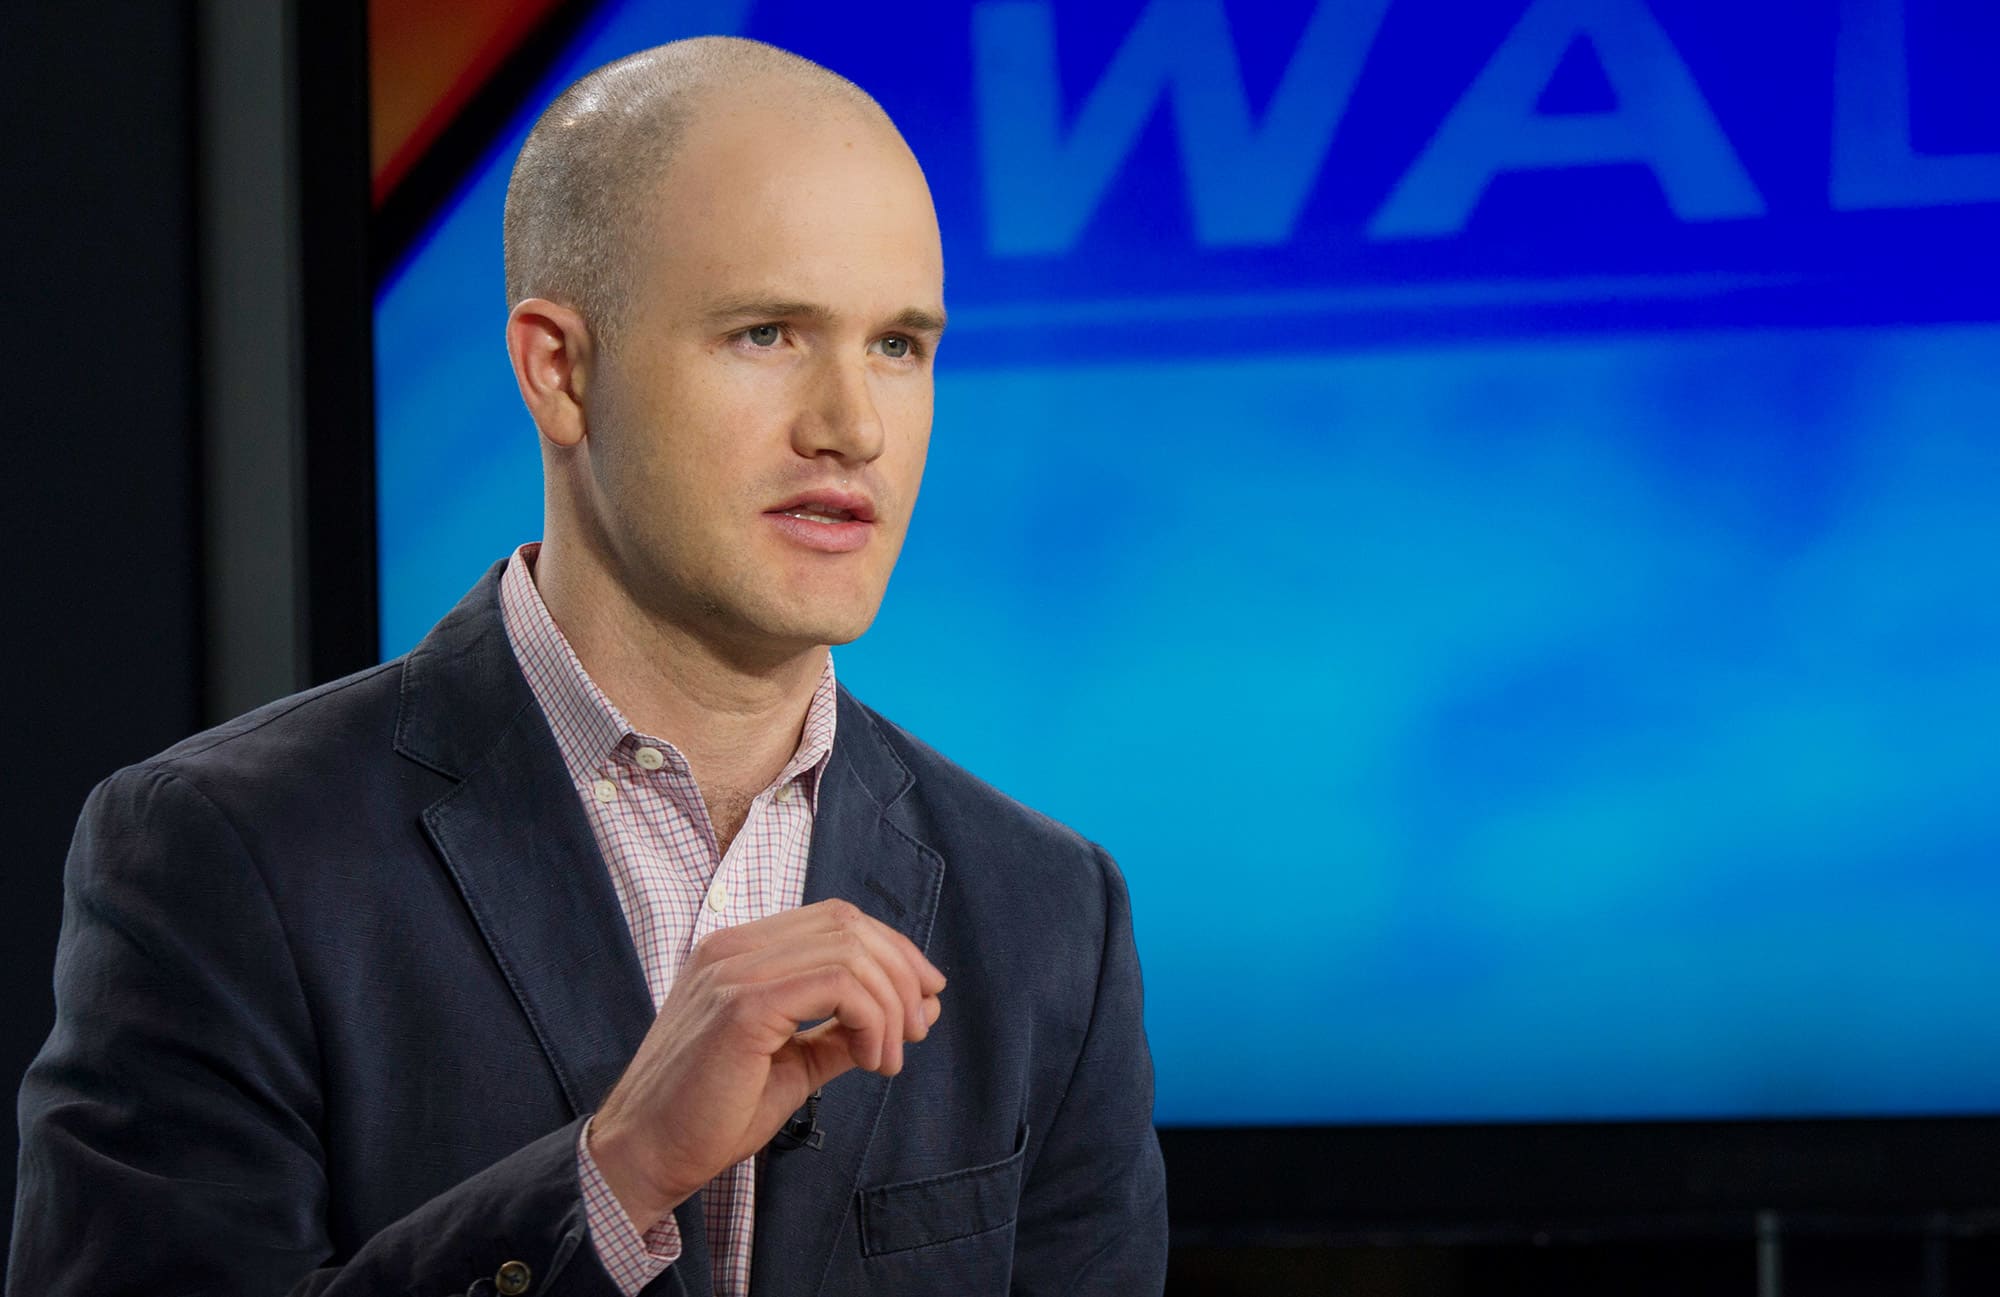 Leading US cryptocurrency marketplace Coinbase steps up efforts to expand business